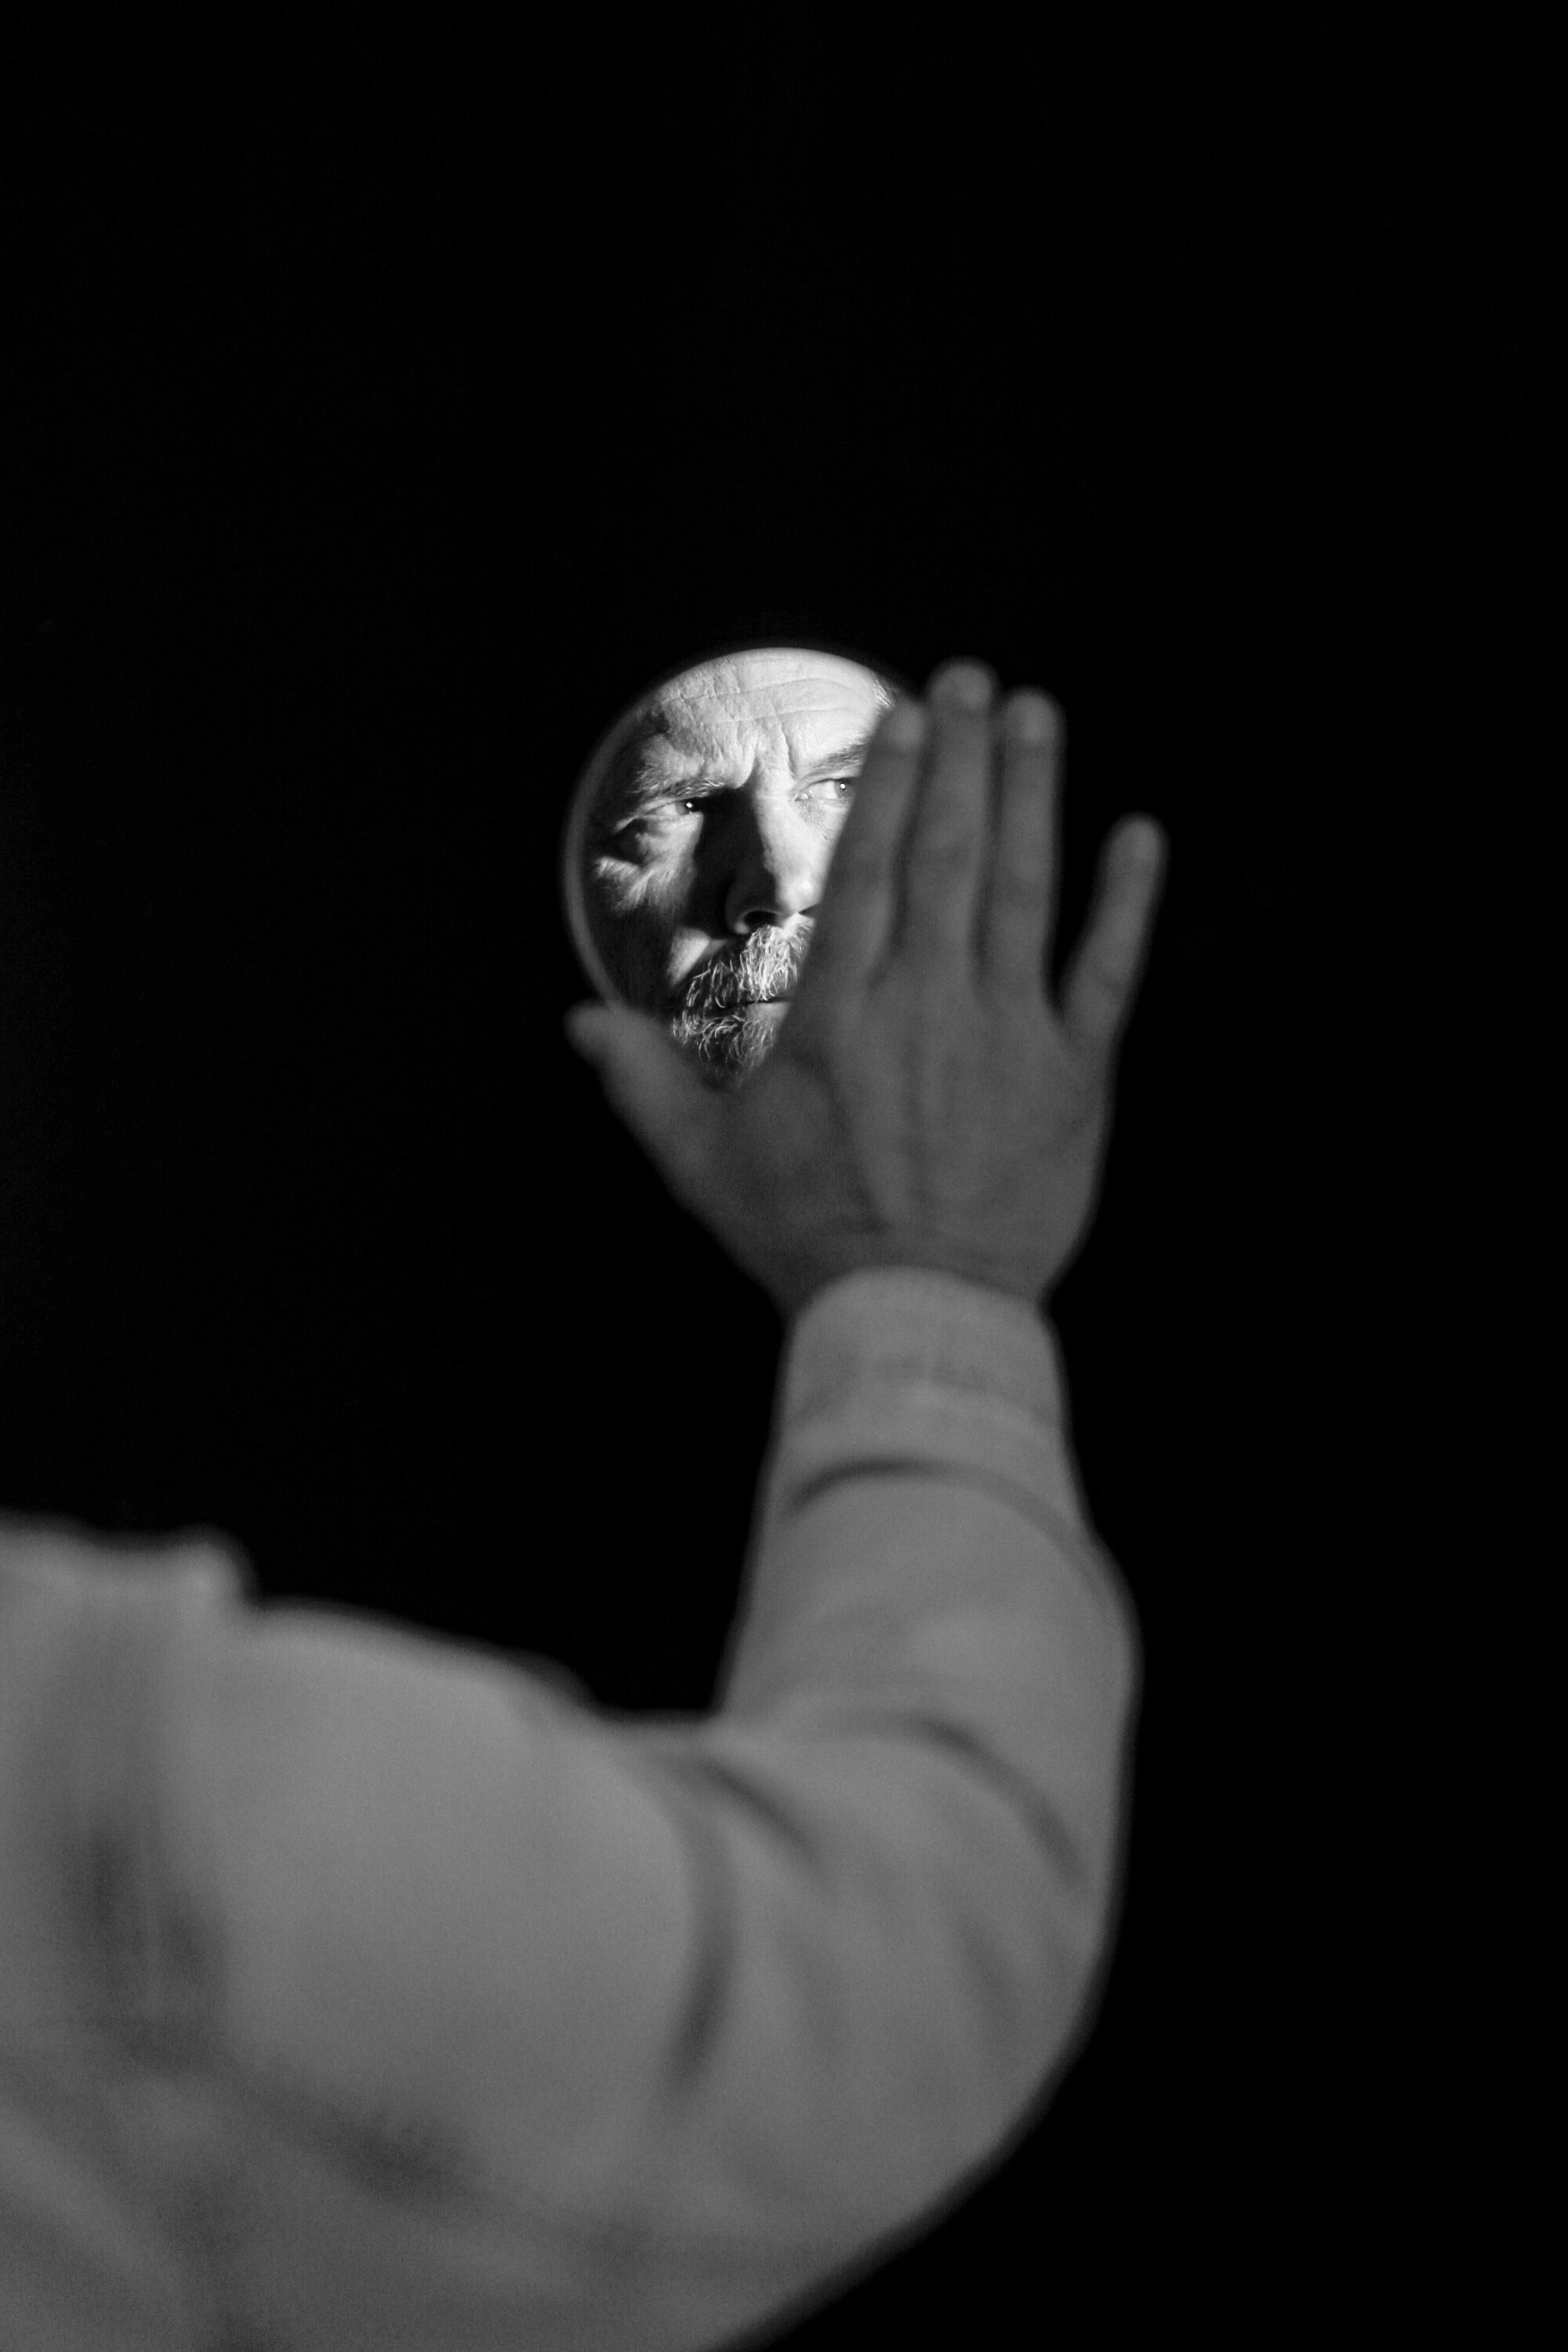 A man holds a mirror against a black background with his face seen in the mirror.